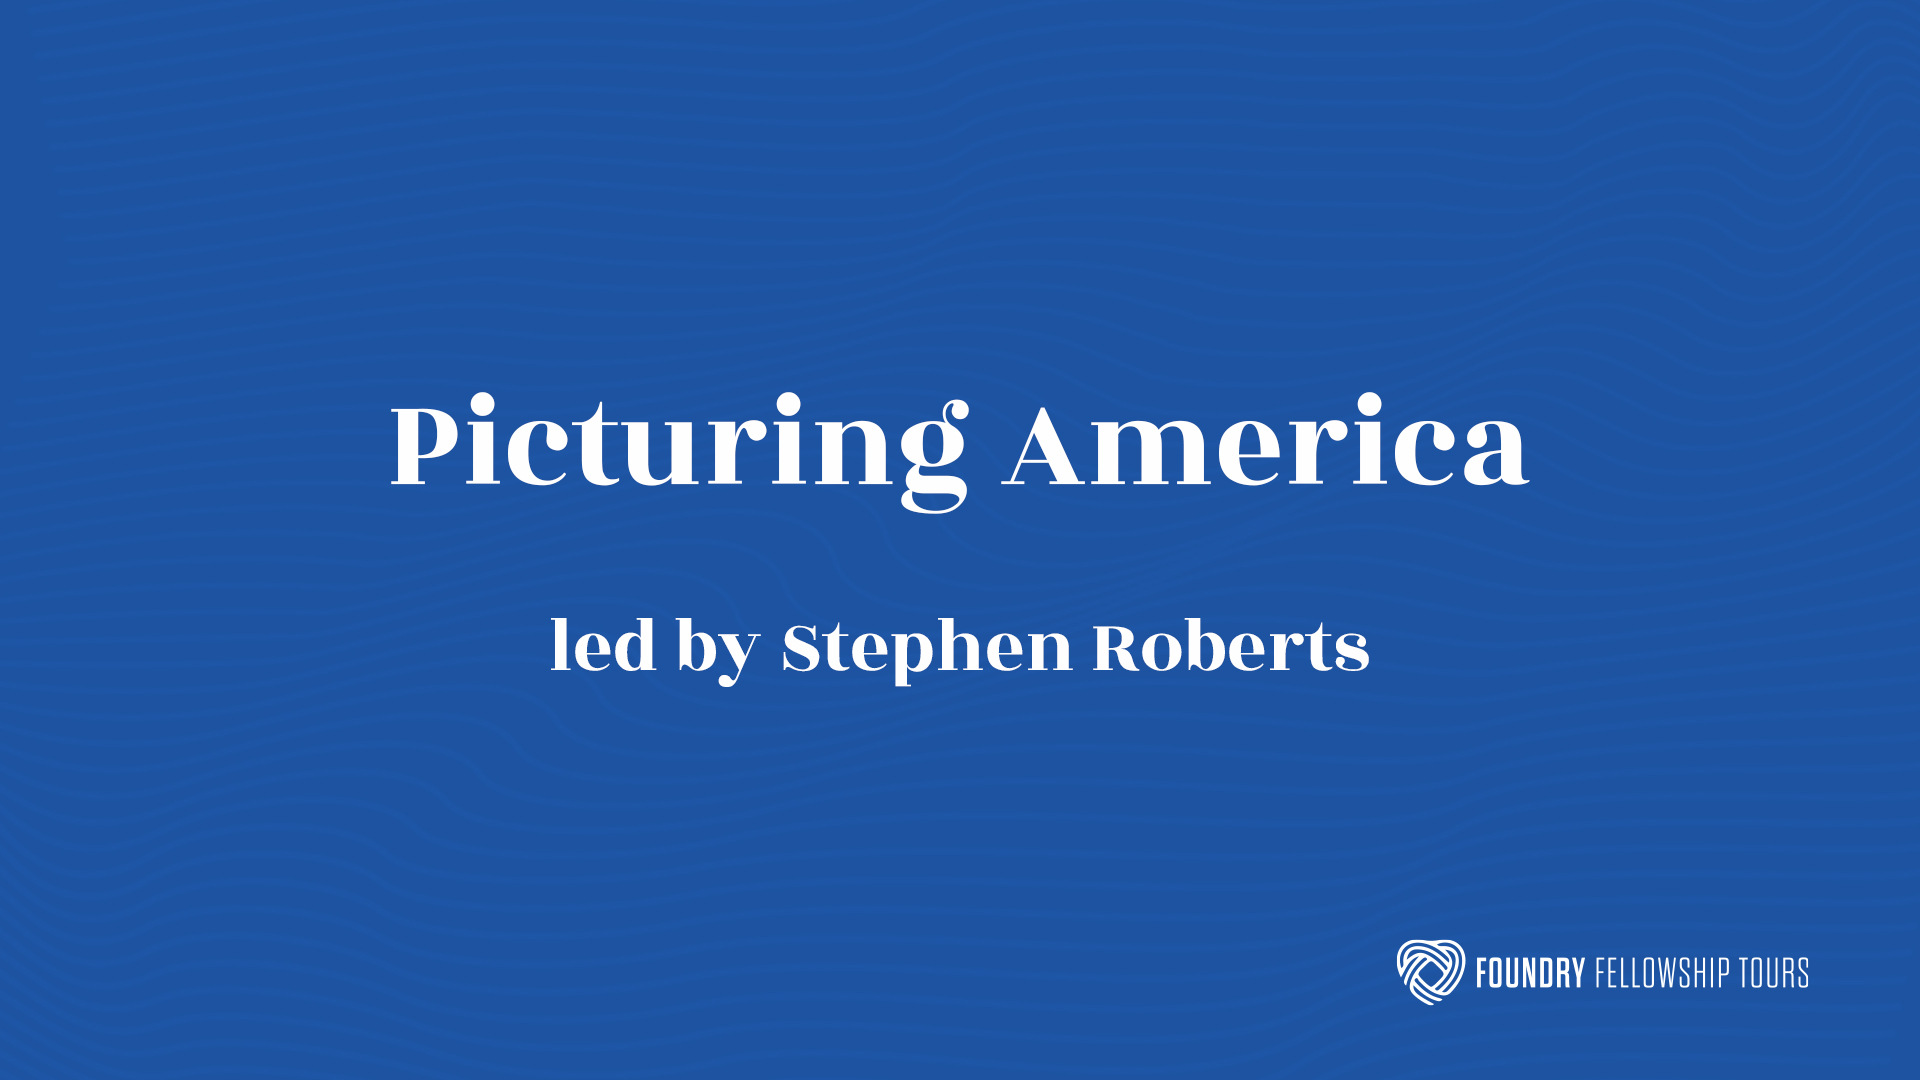 Picturing America Through the Eyes of Artists